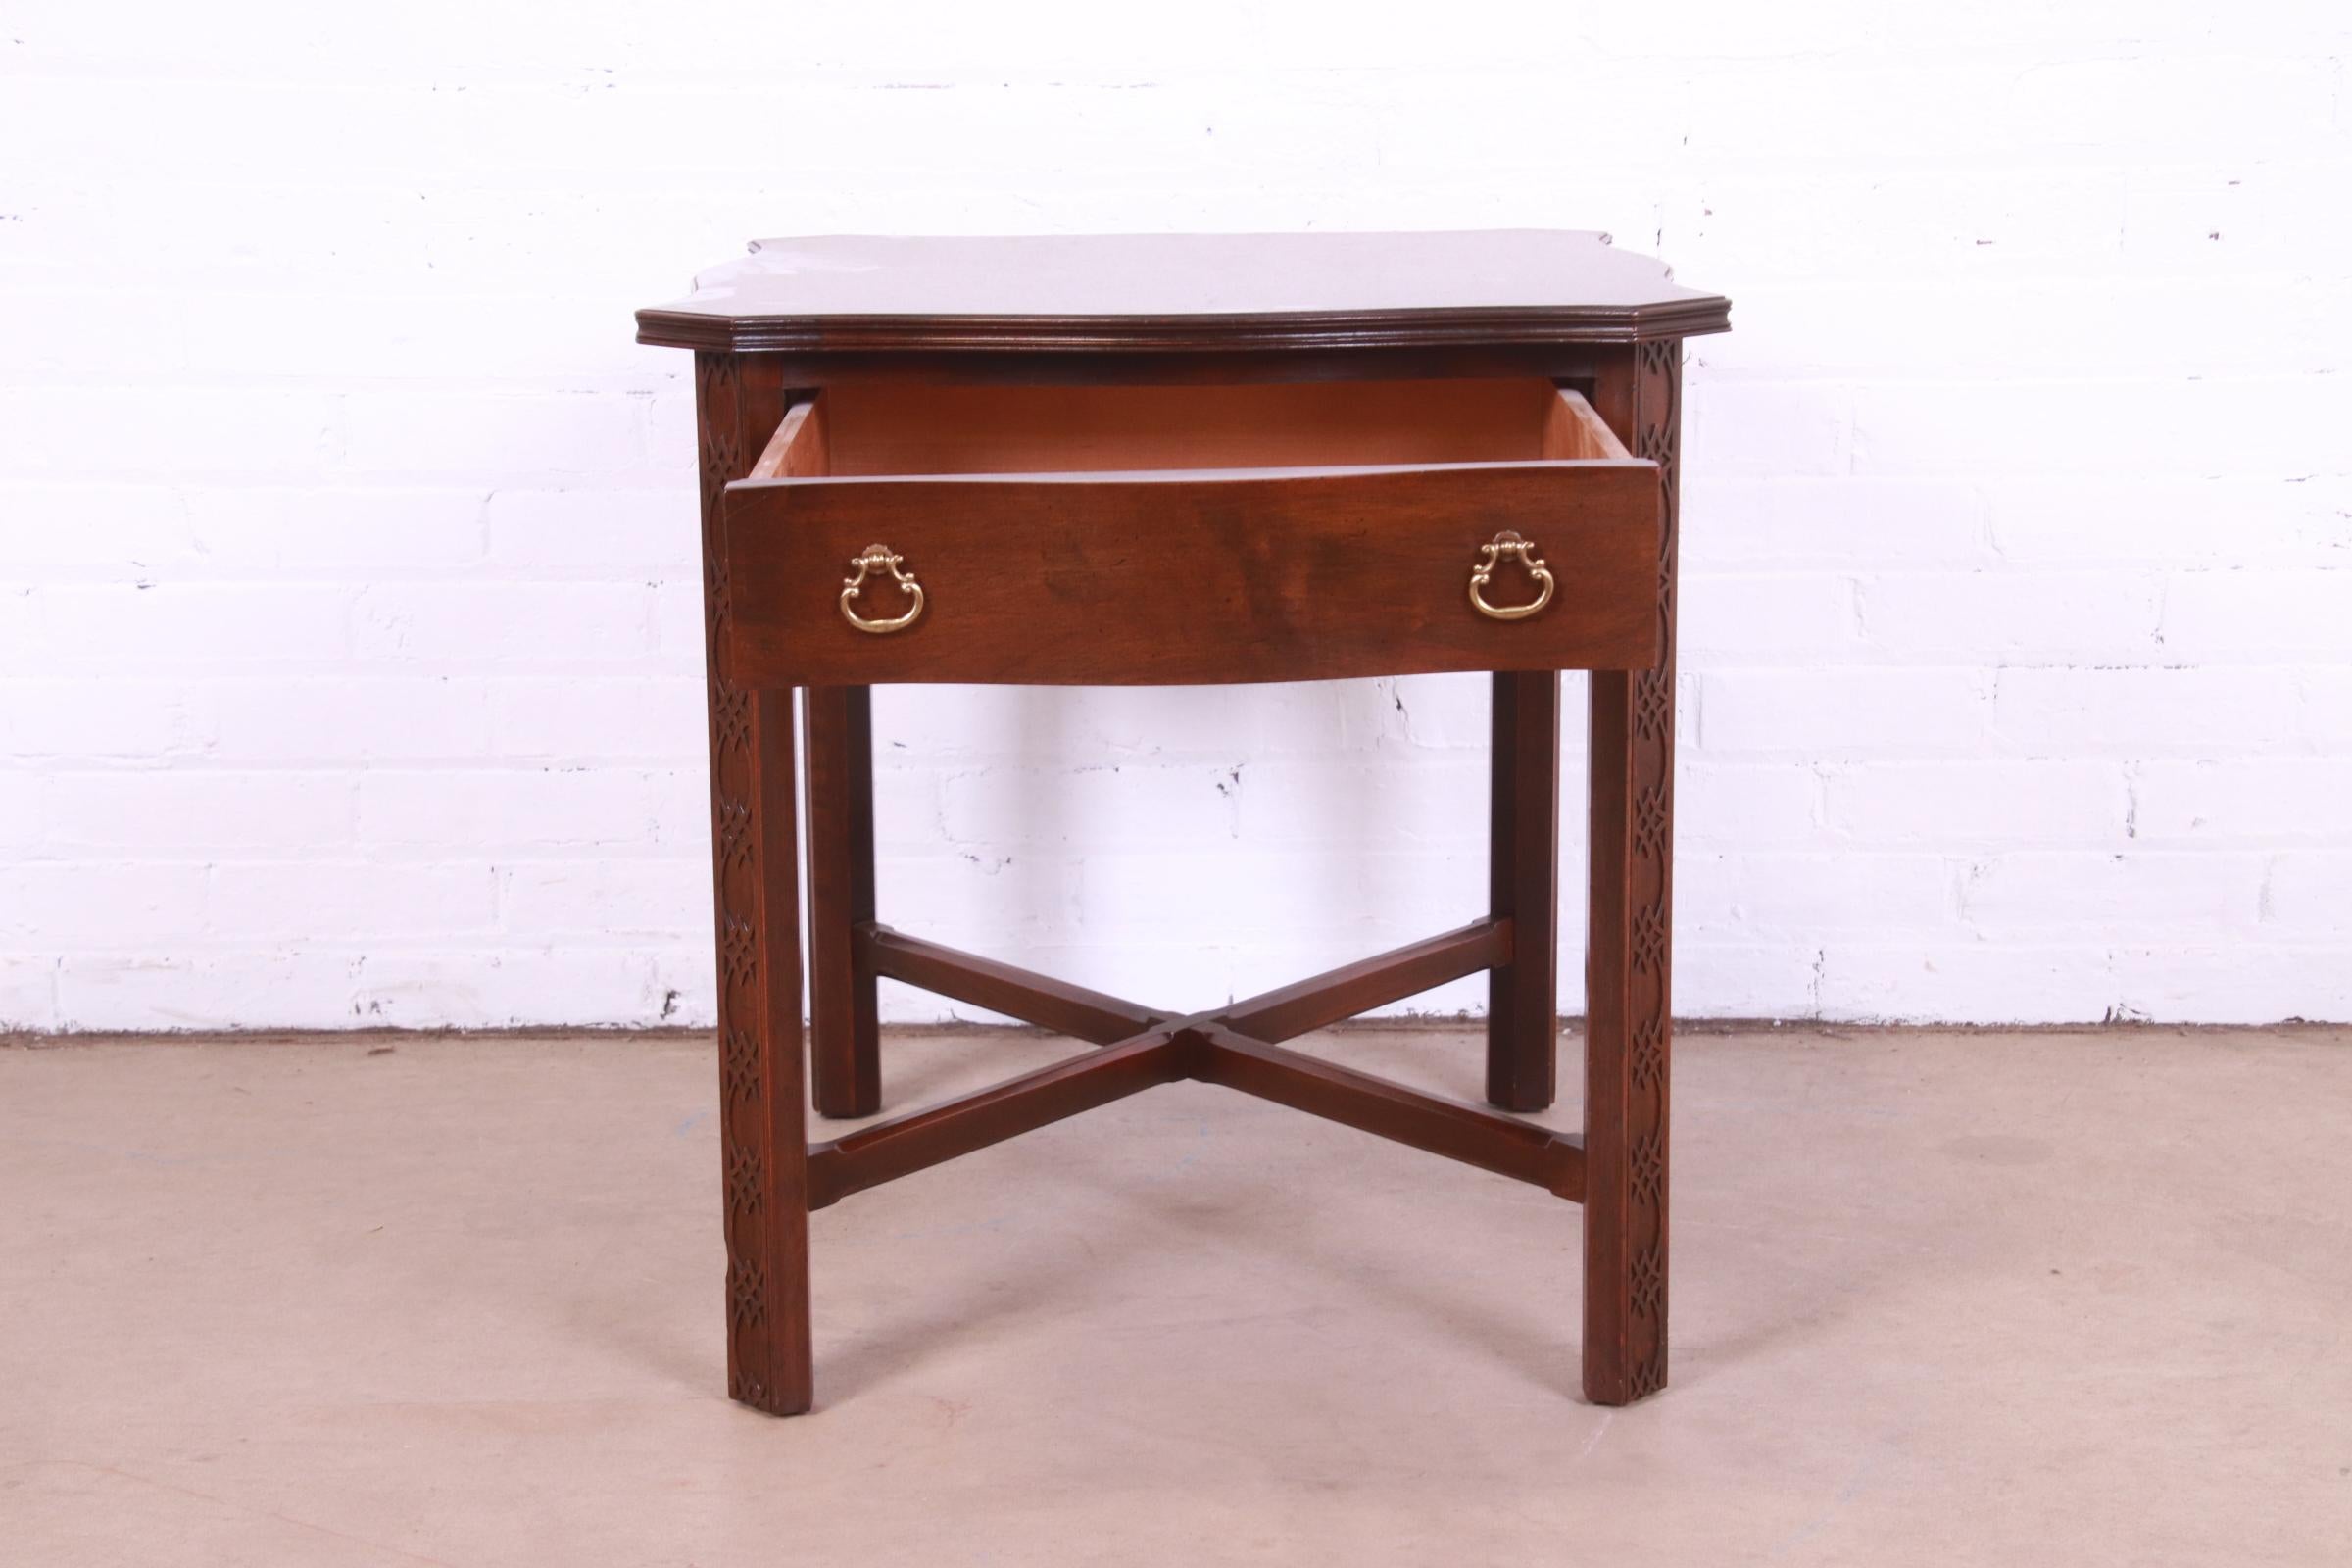 Ethan Allen Georgian Carved Cherry Wood Tea Table or Occasional Side Table 1